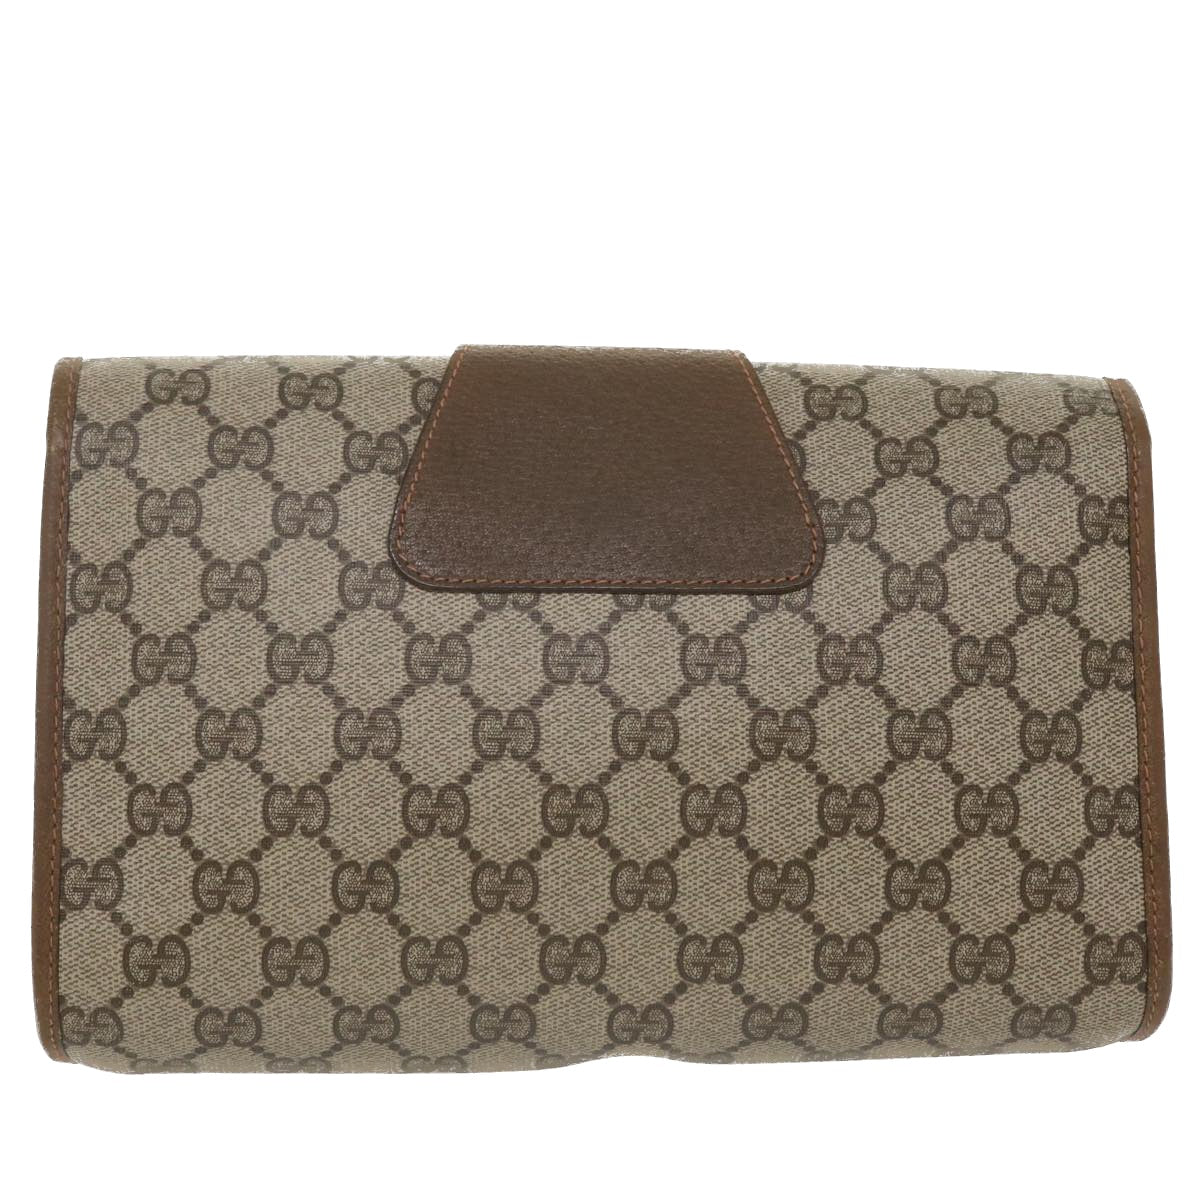 GUCCI GG Canvas Web Sherry Line Clutch Bag Beige Red Green 8901030 Auth ny156 - 0